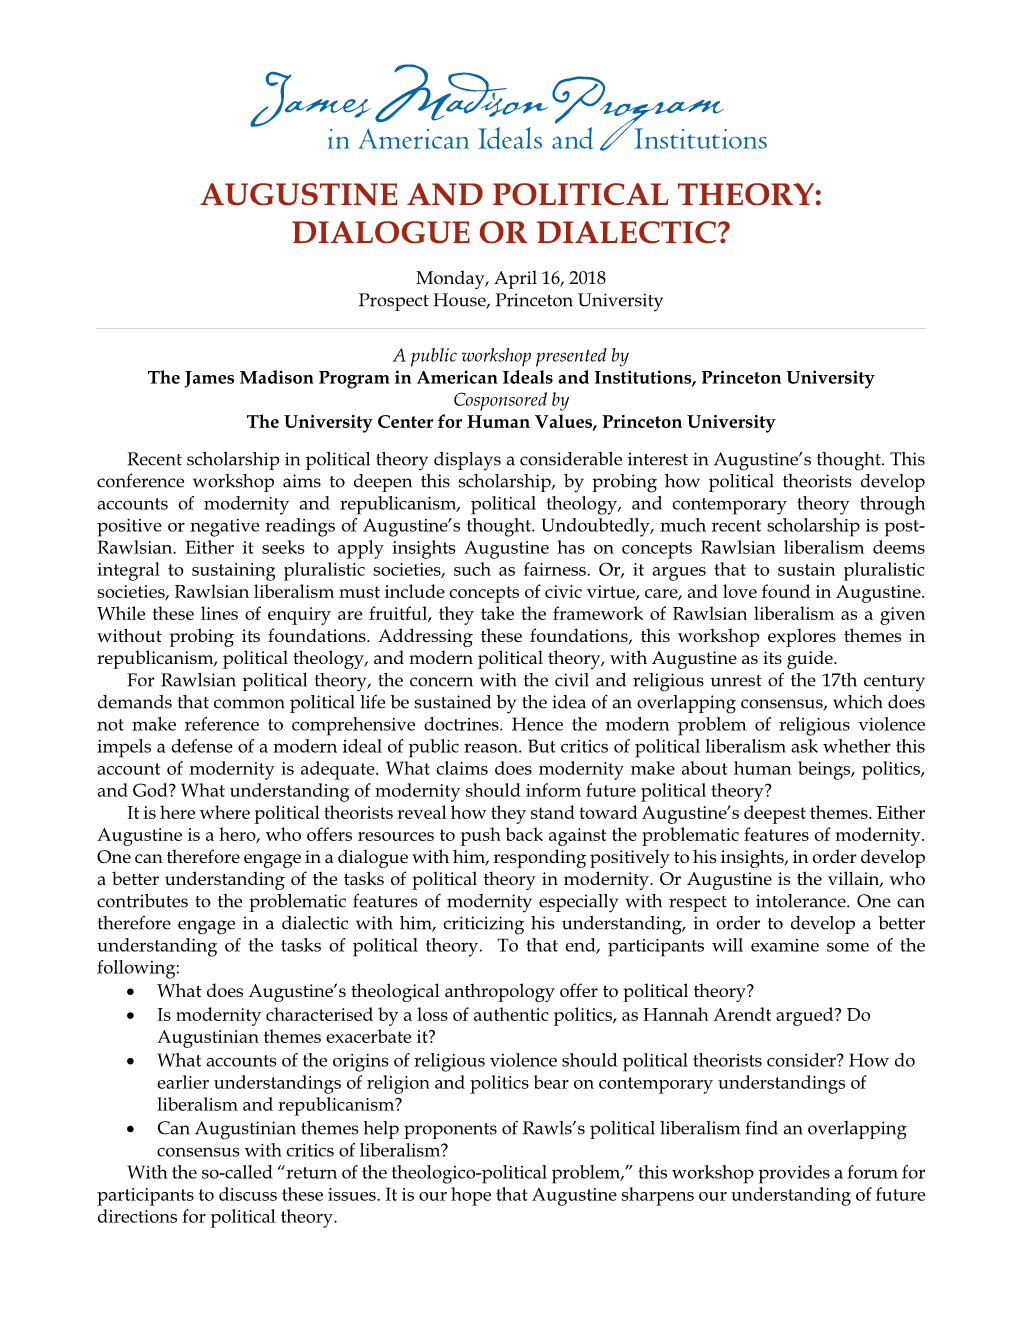 Augustine and Political Theory: Dialogue Or Dialectic?